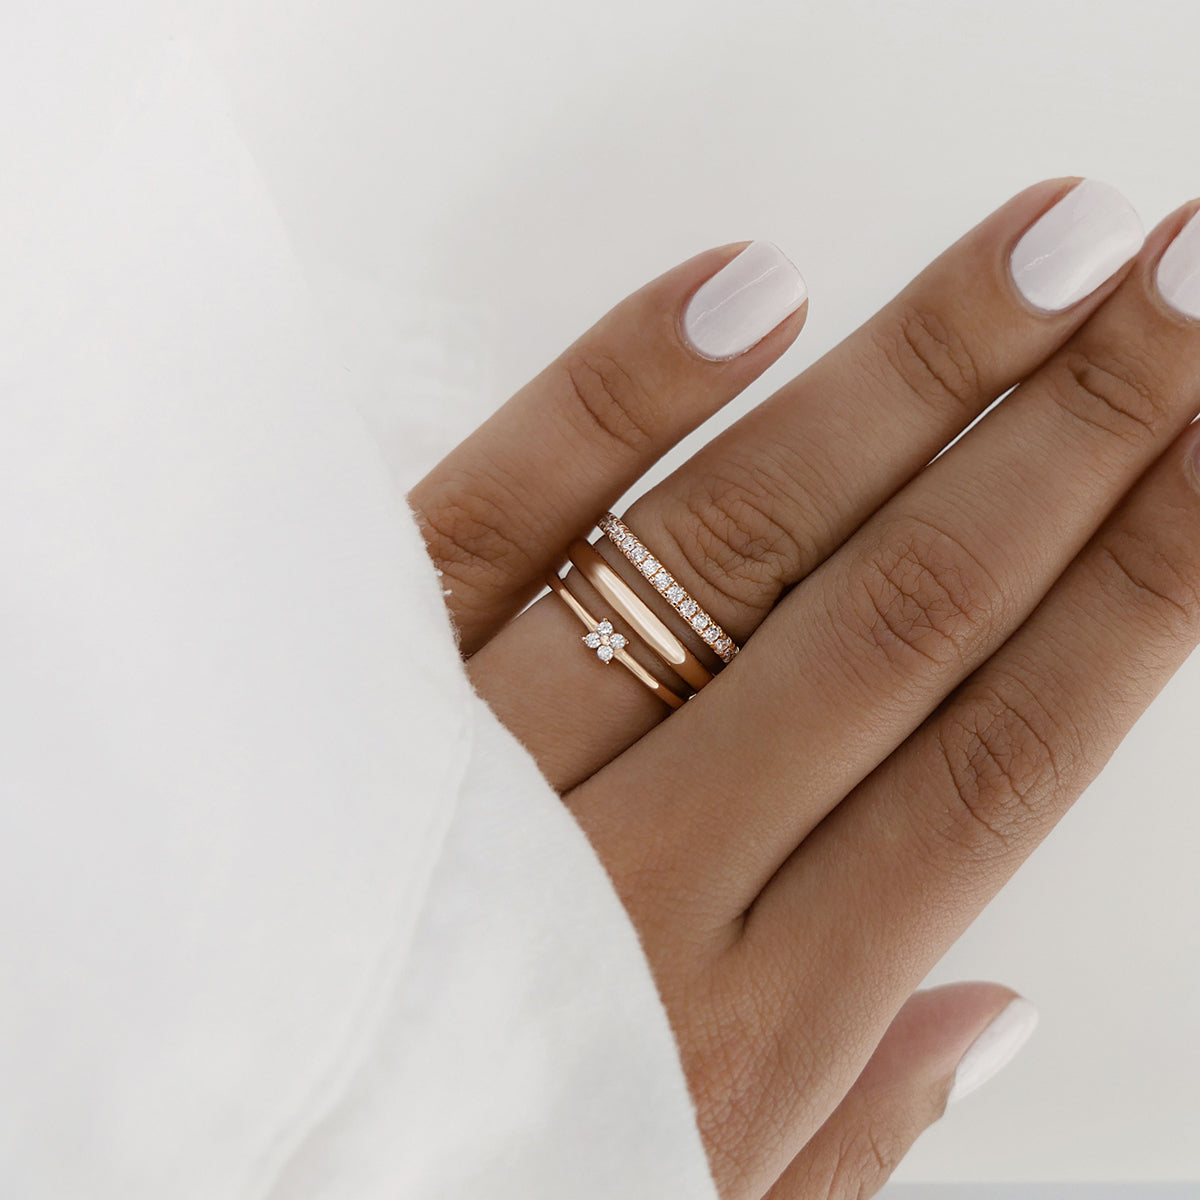 rose gold rings with white zirconia stones stacked on ring finger